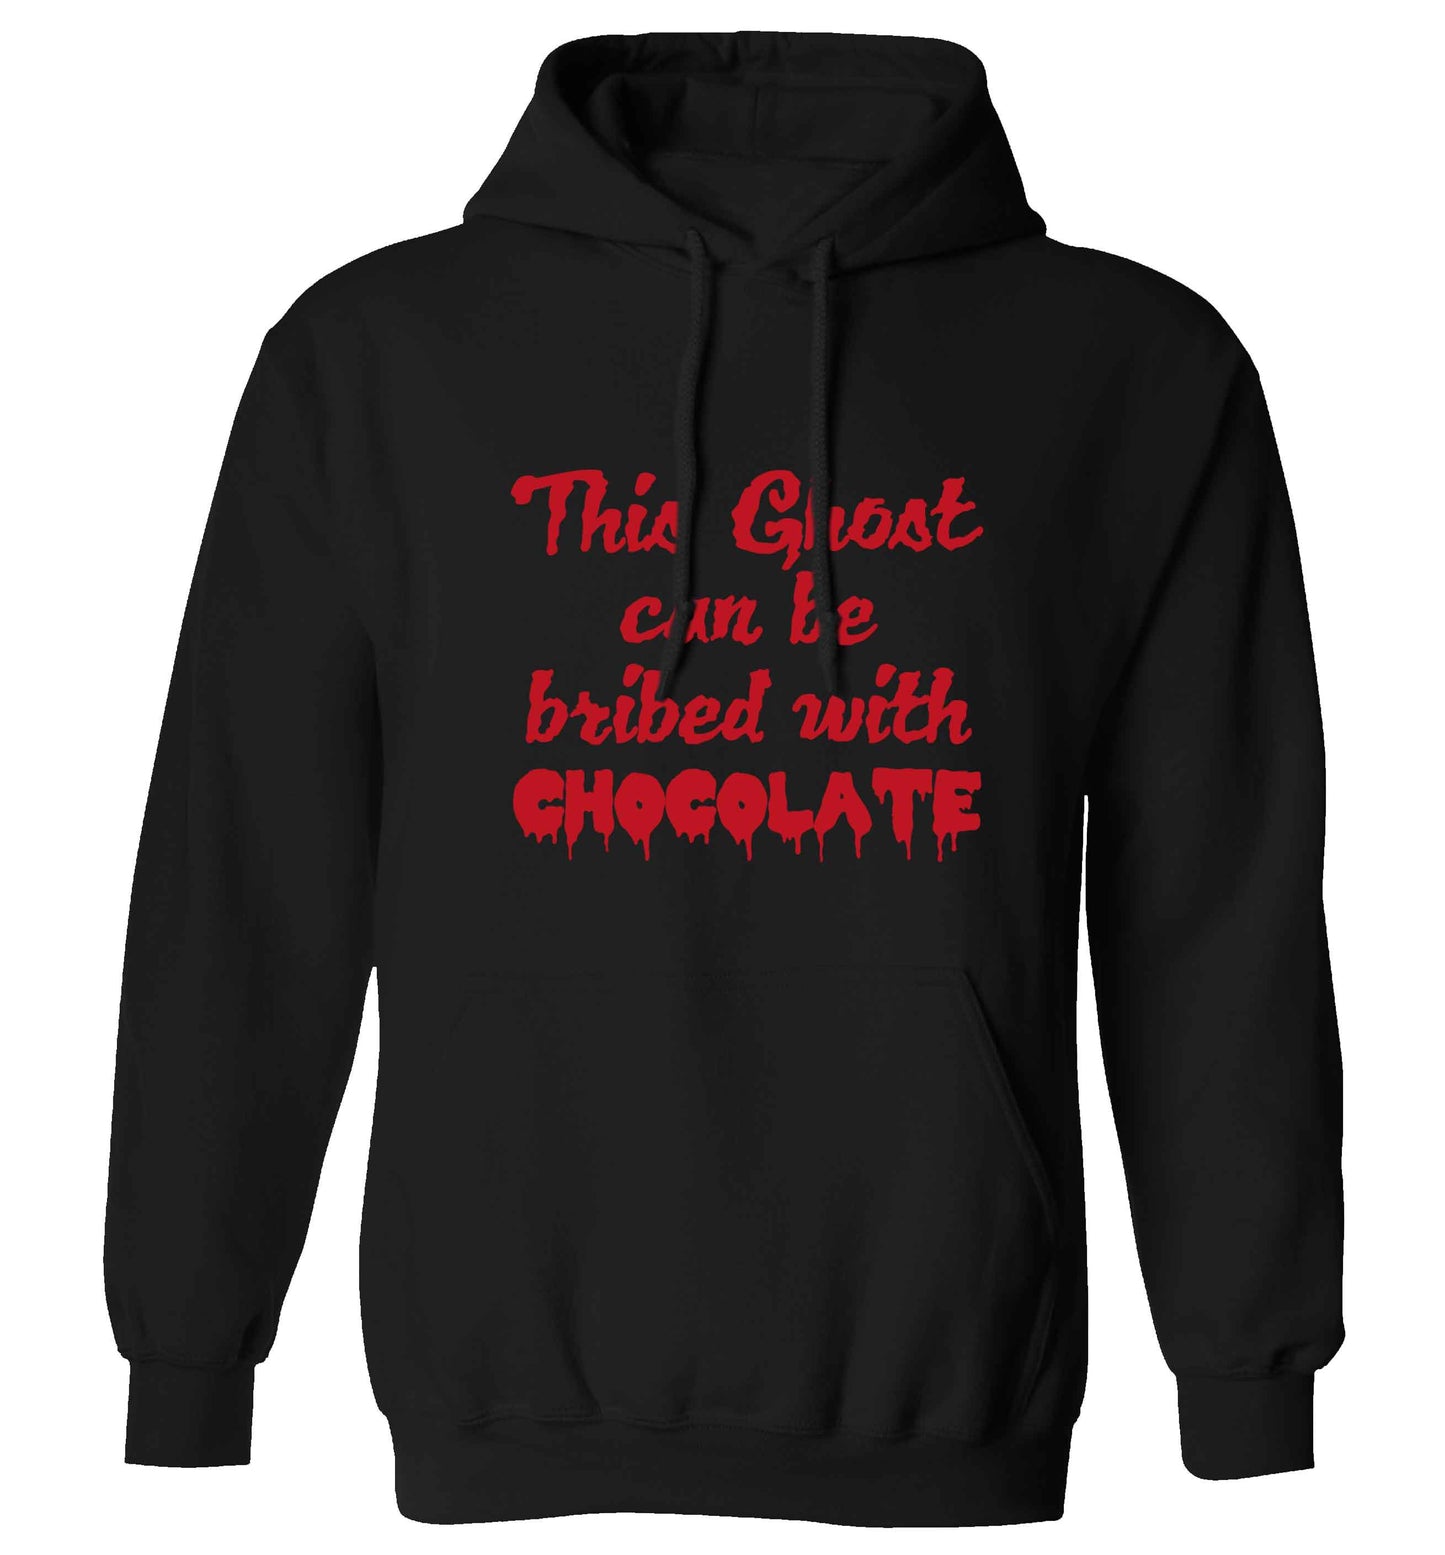 This ghost can be bribed with chocolate adults unisex black hoodie 2XL